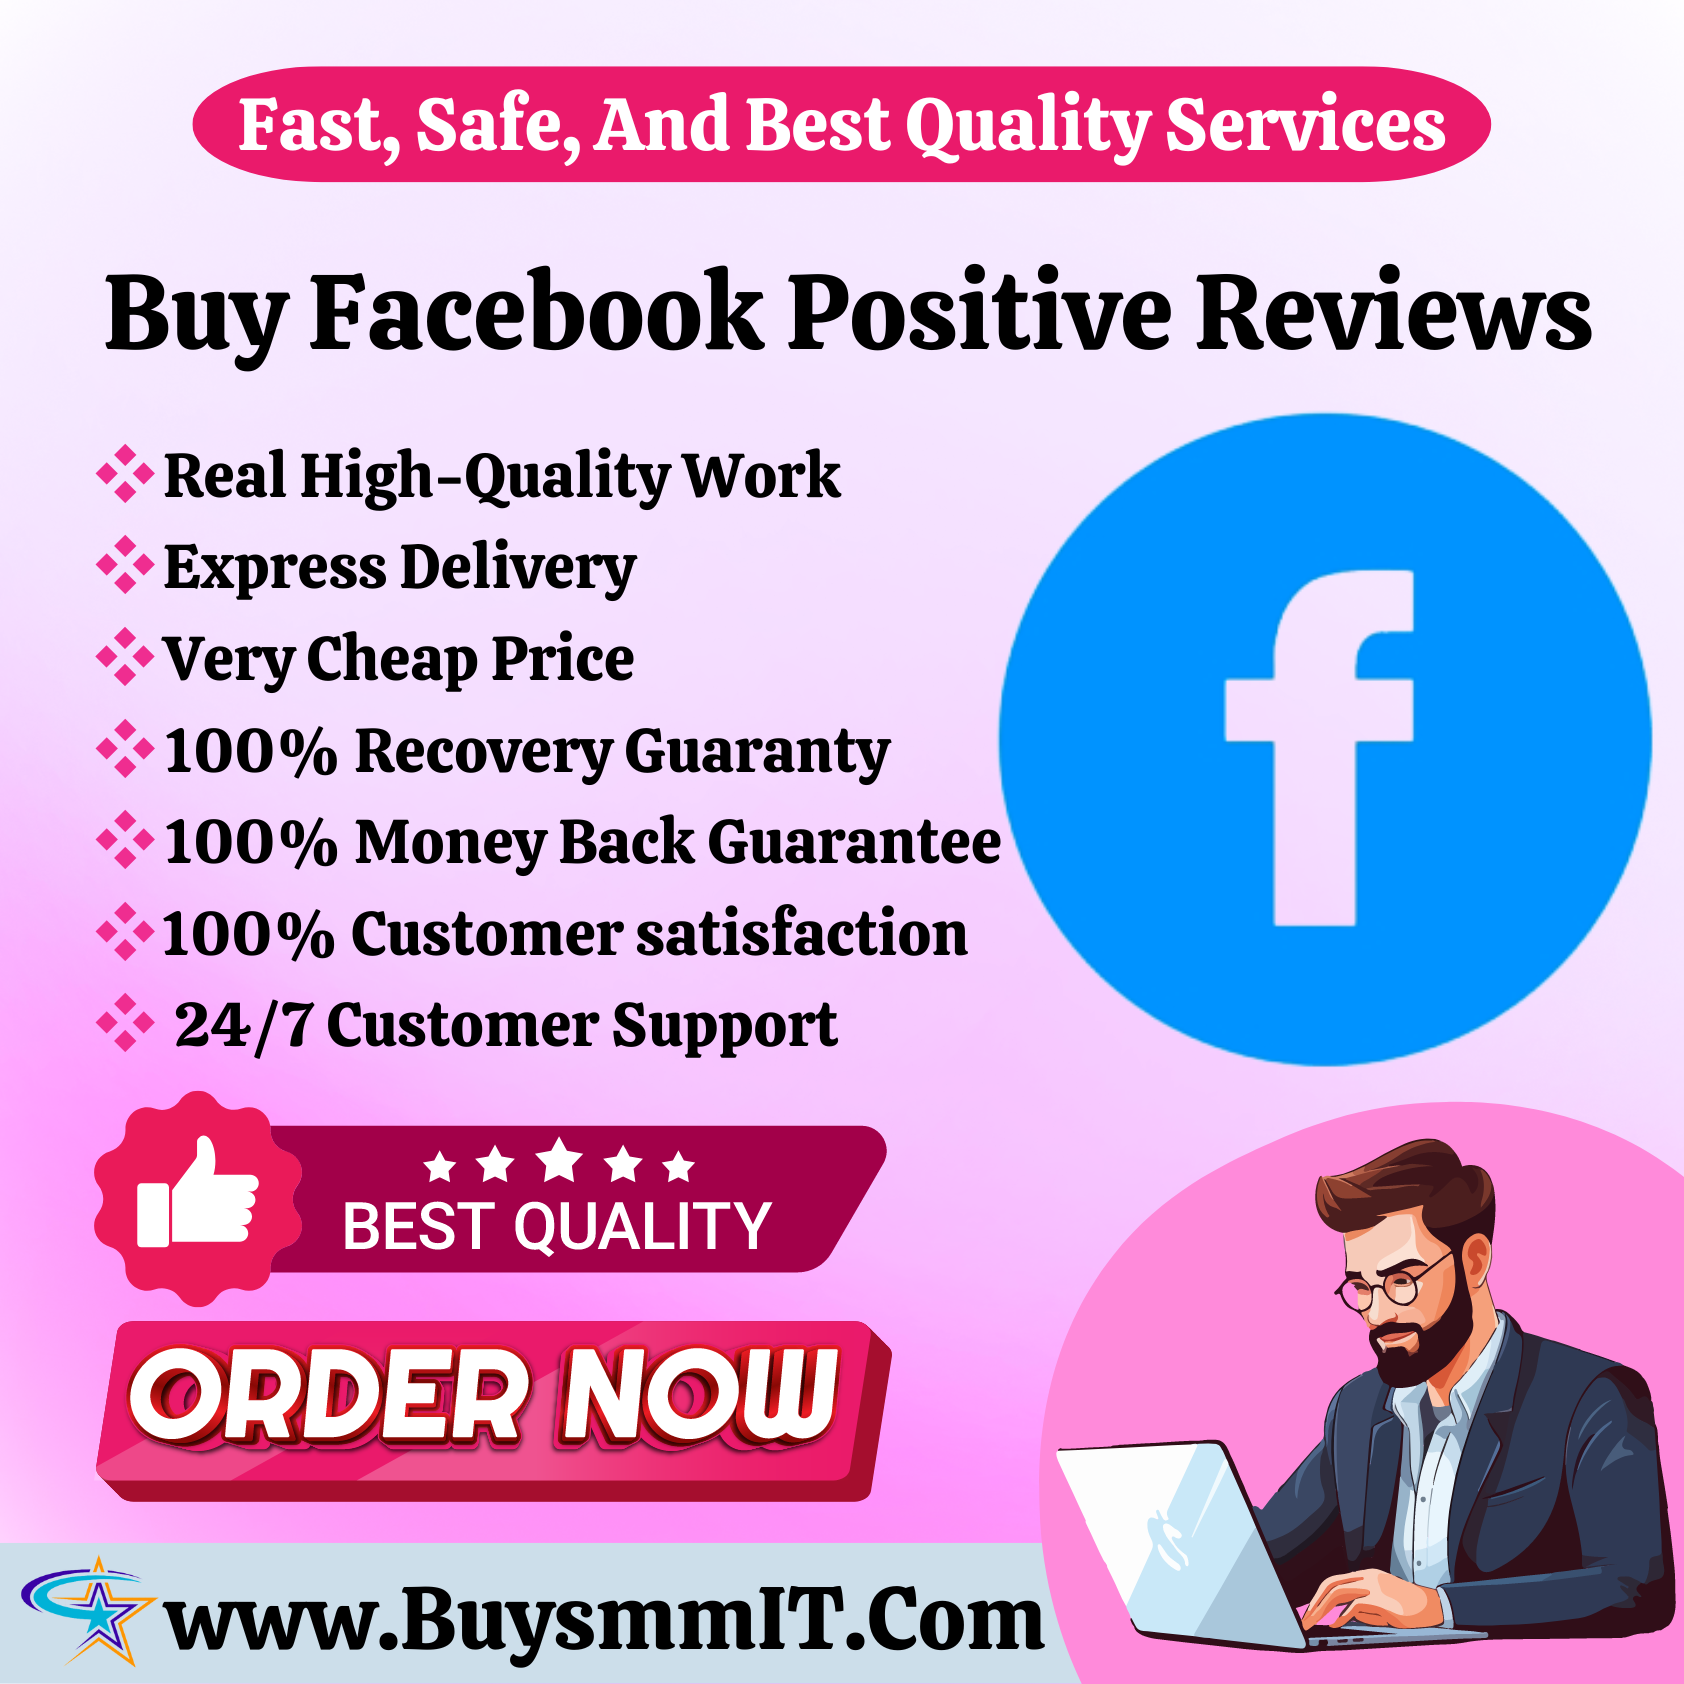 Buy Facebook Positive Reviews 100% Genuine and Real-Looking ...